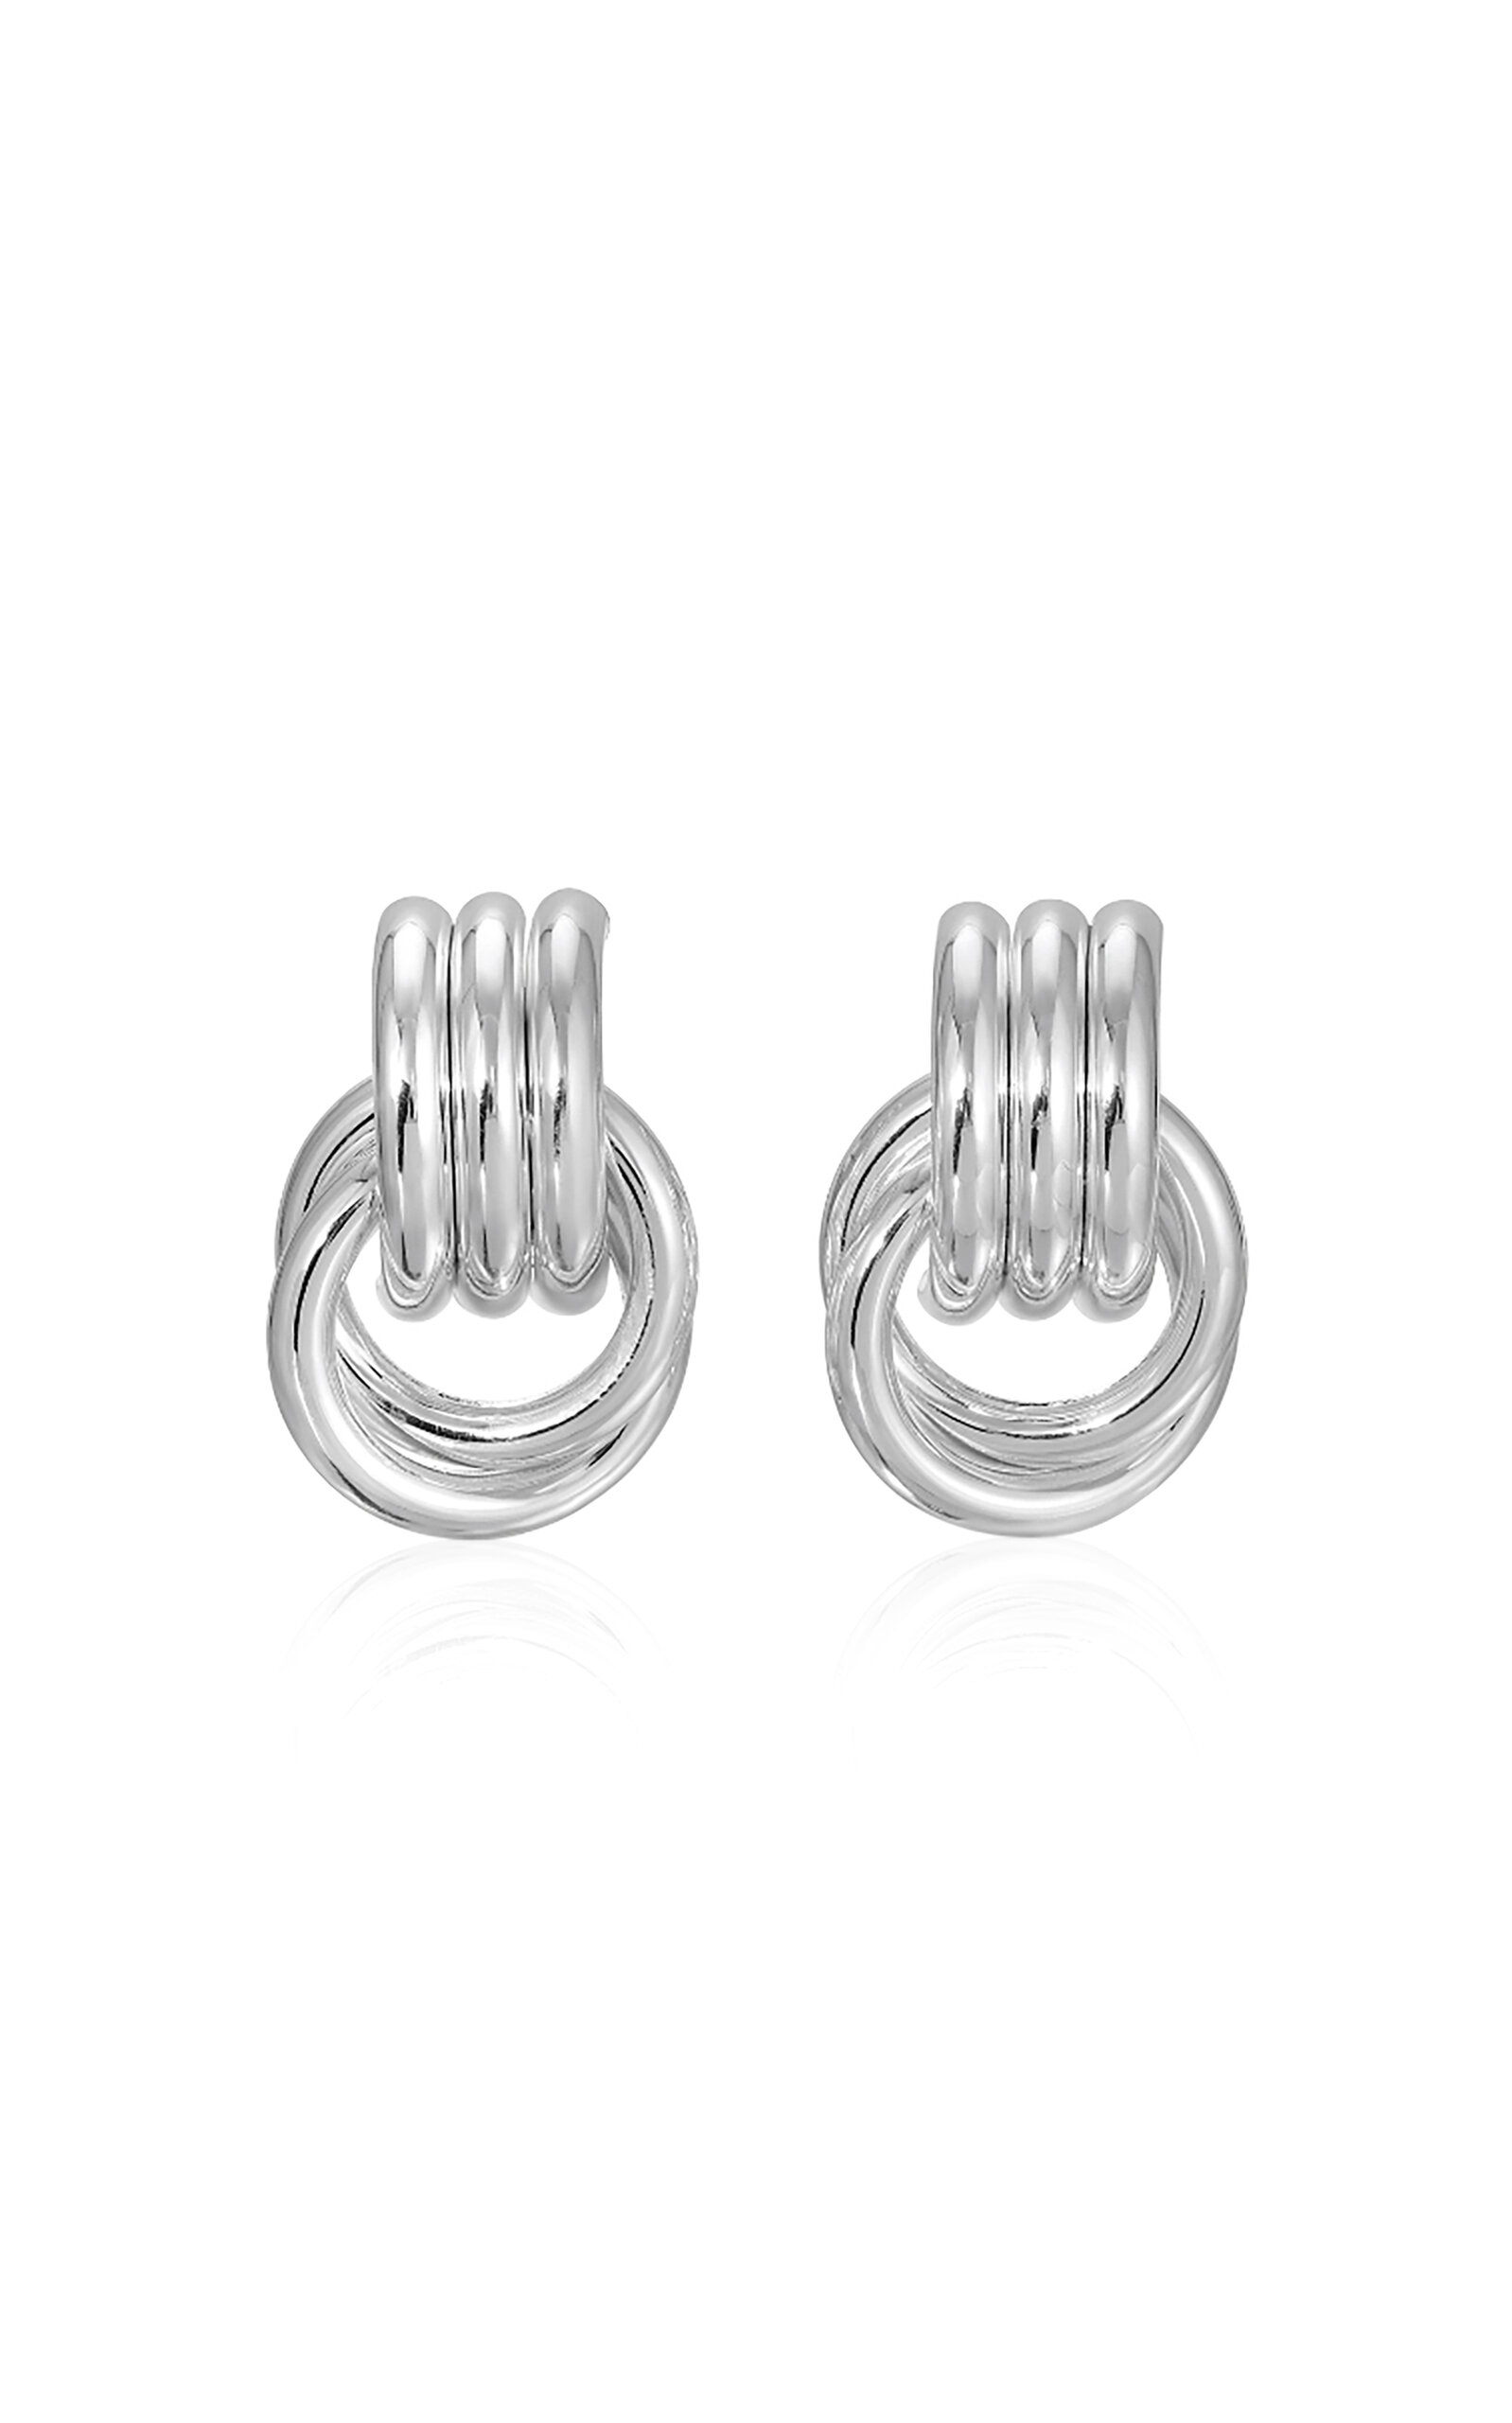 Mini Knot Silver-Plated Earrings